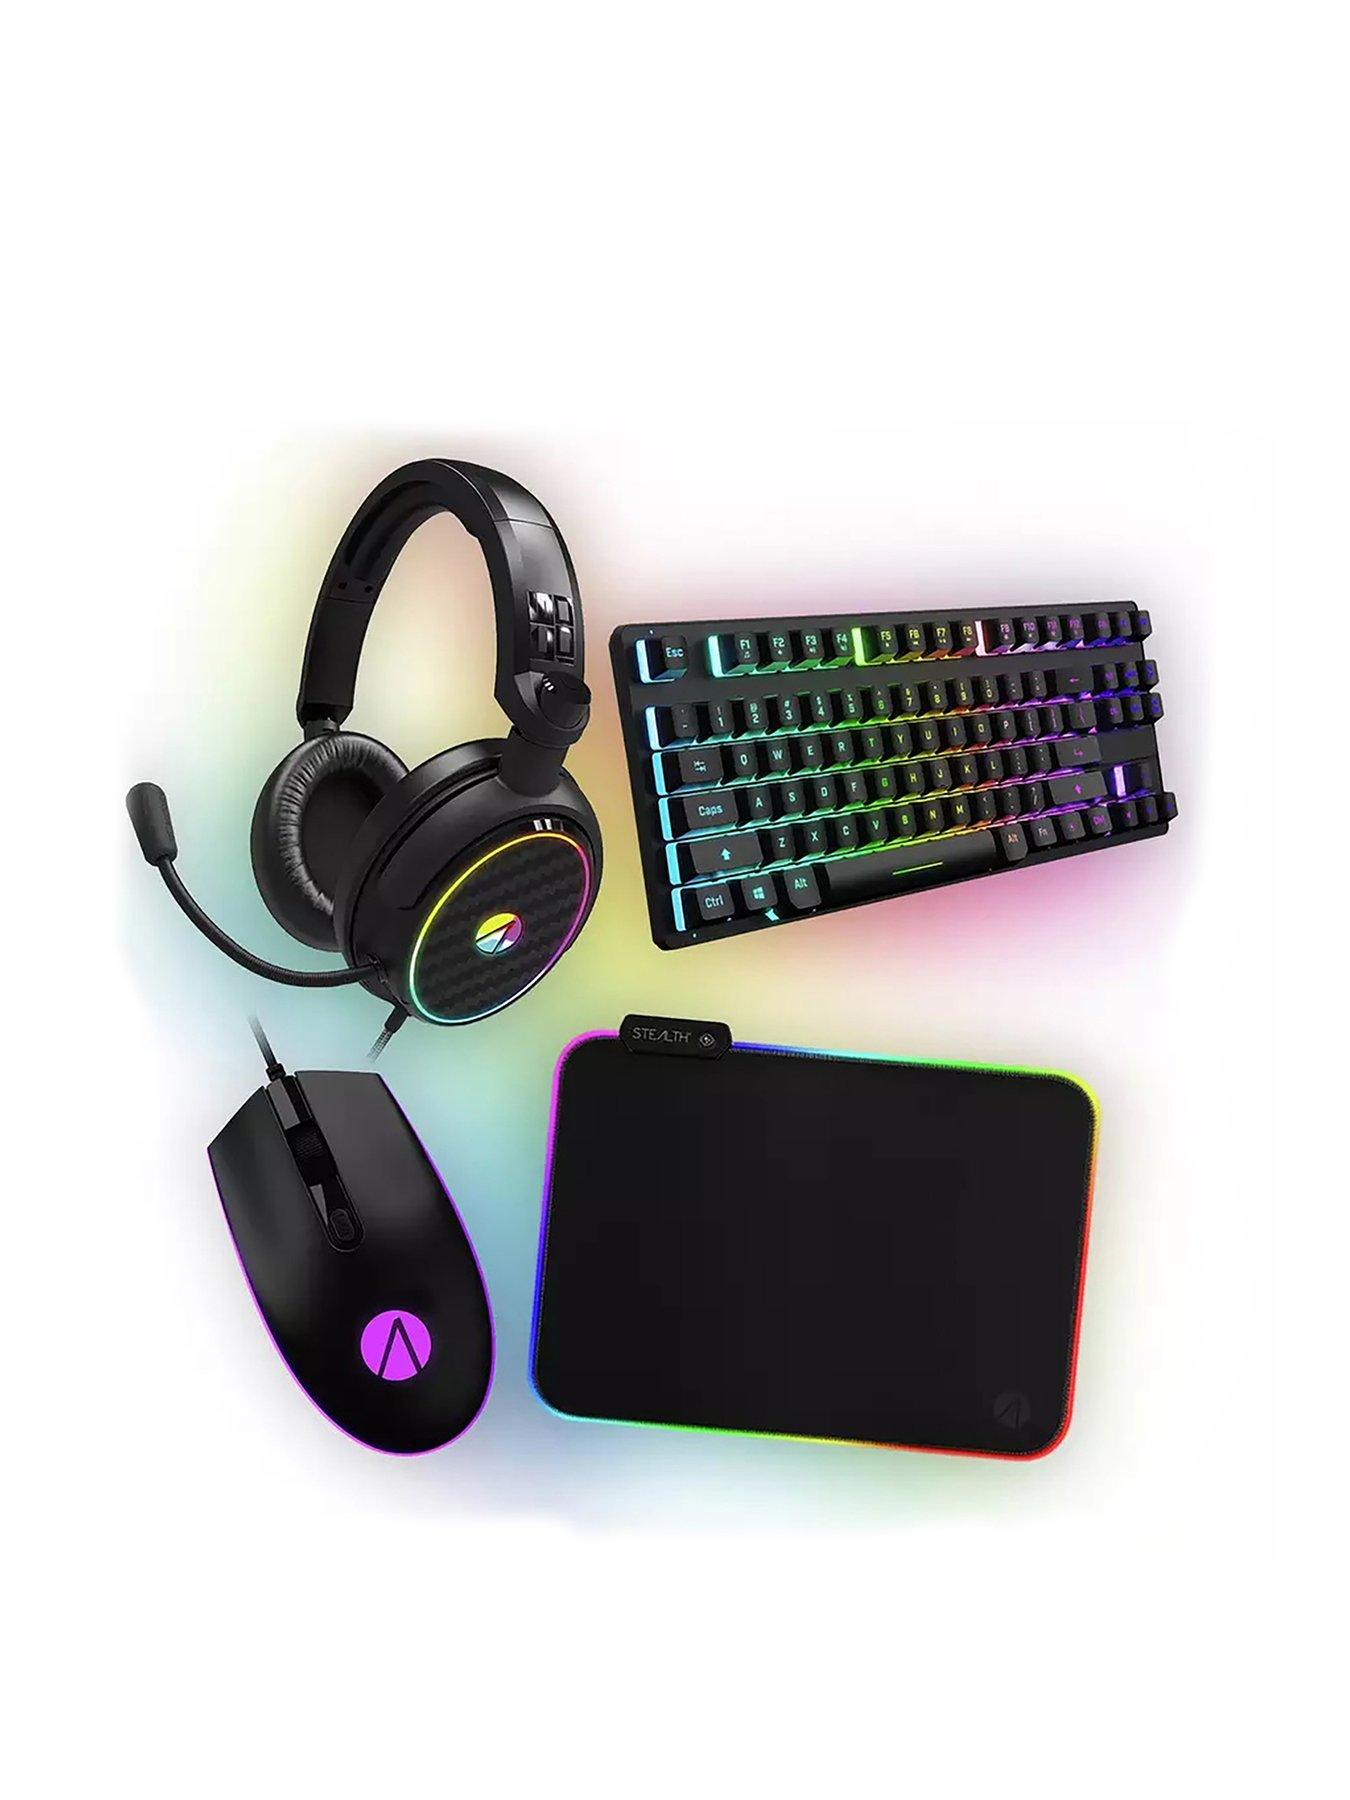 LED Pad, Up 4-in-1 Mouse Bundle Stealth Light Keyboard, C6-100 Gaming Mouse, Headset Gaming -